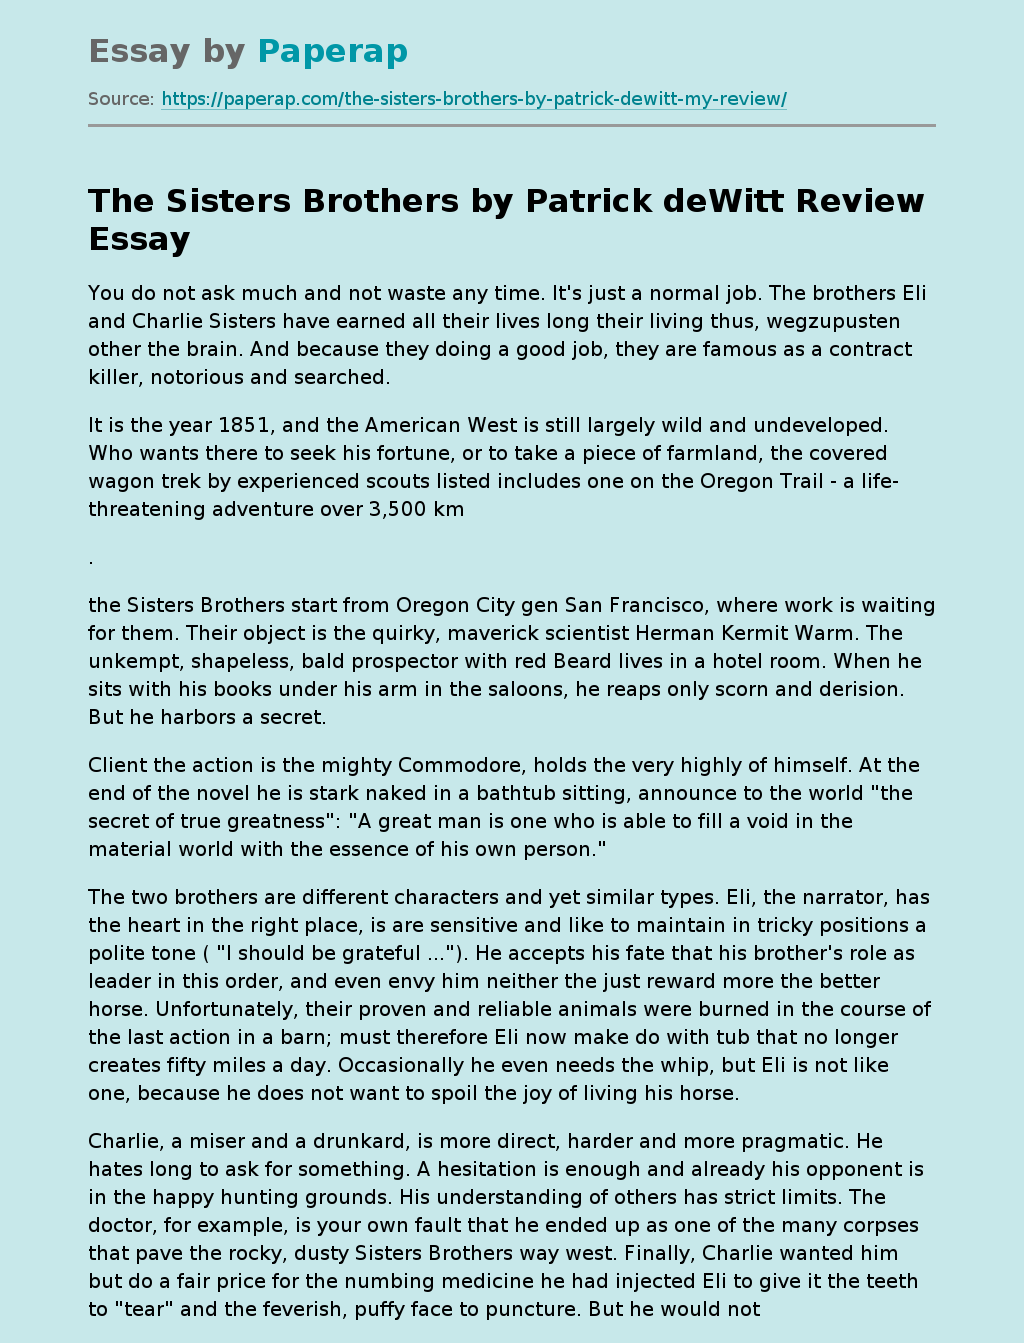 "The Sisters Brother"s by Patrick de Witt